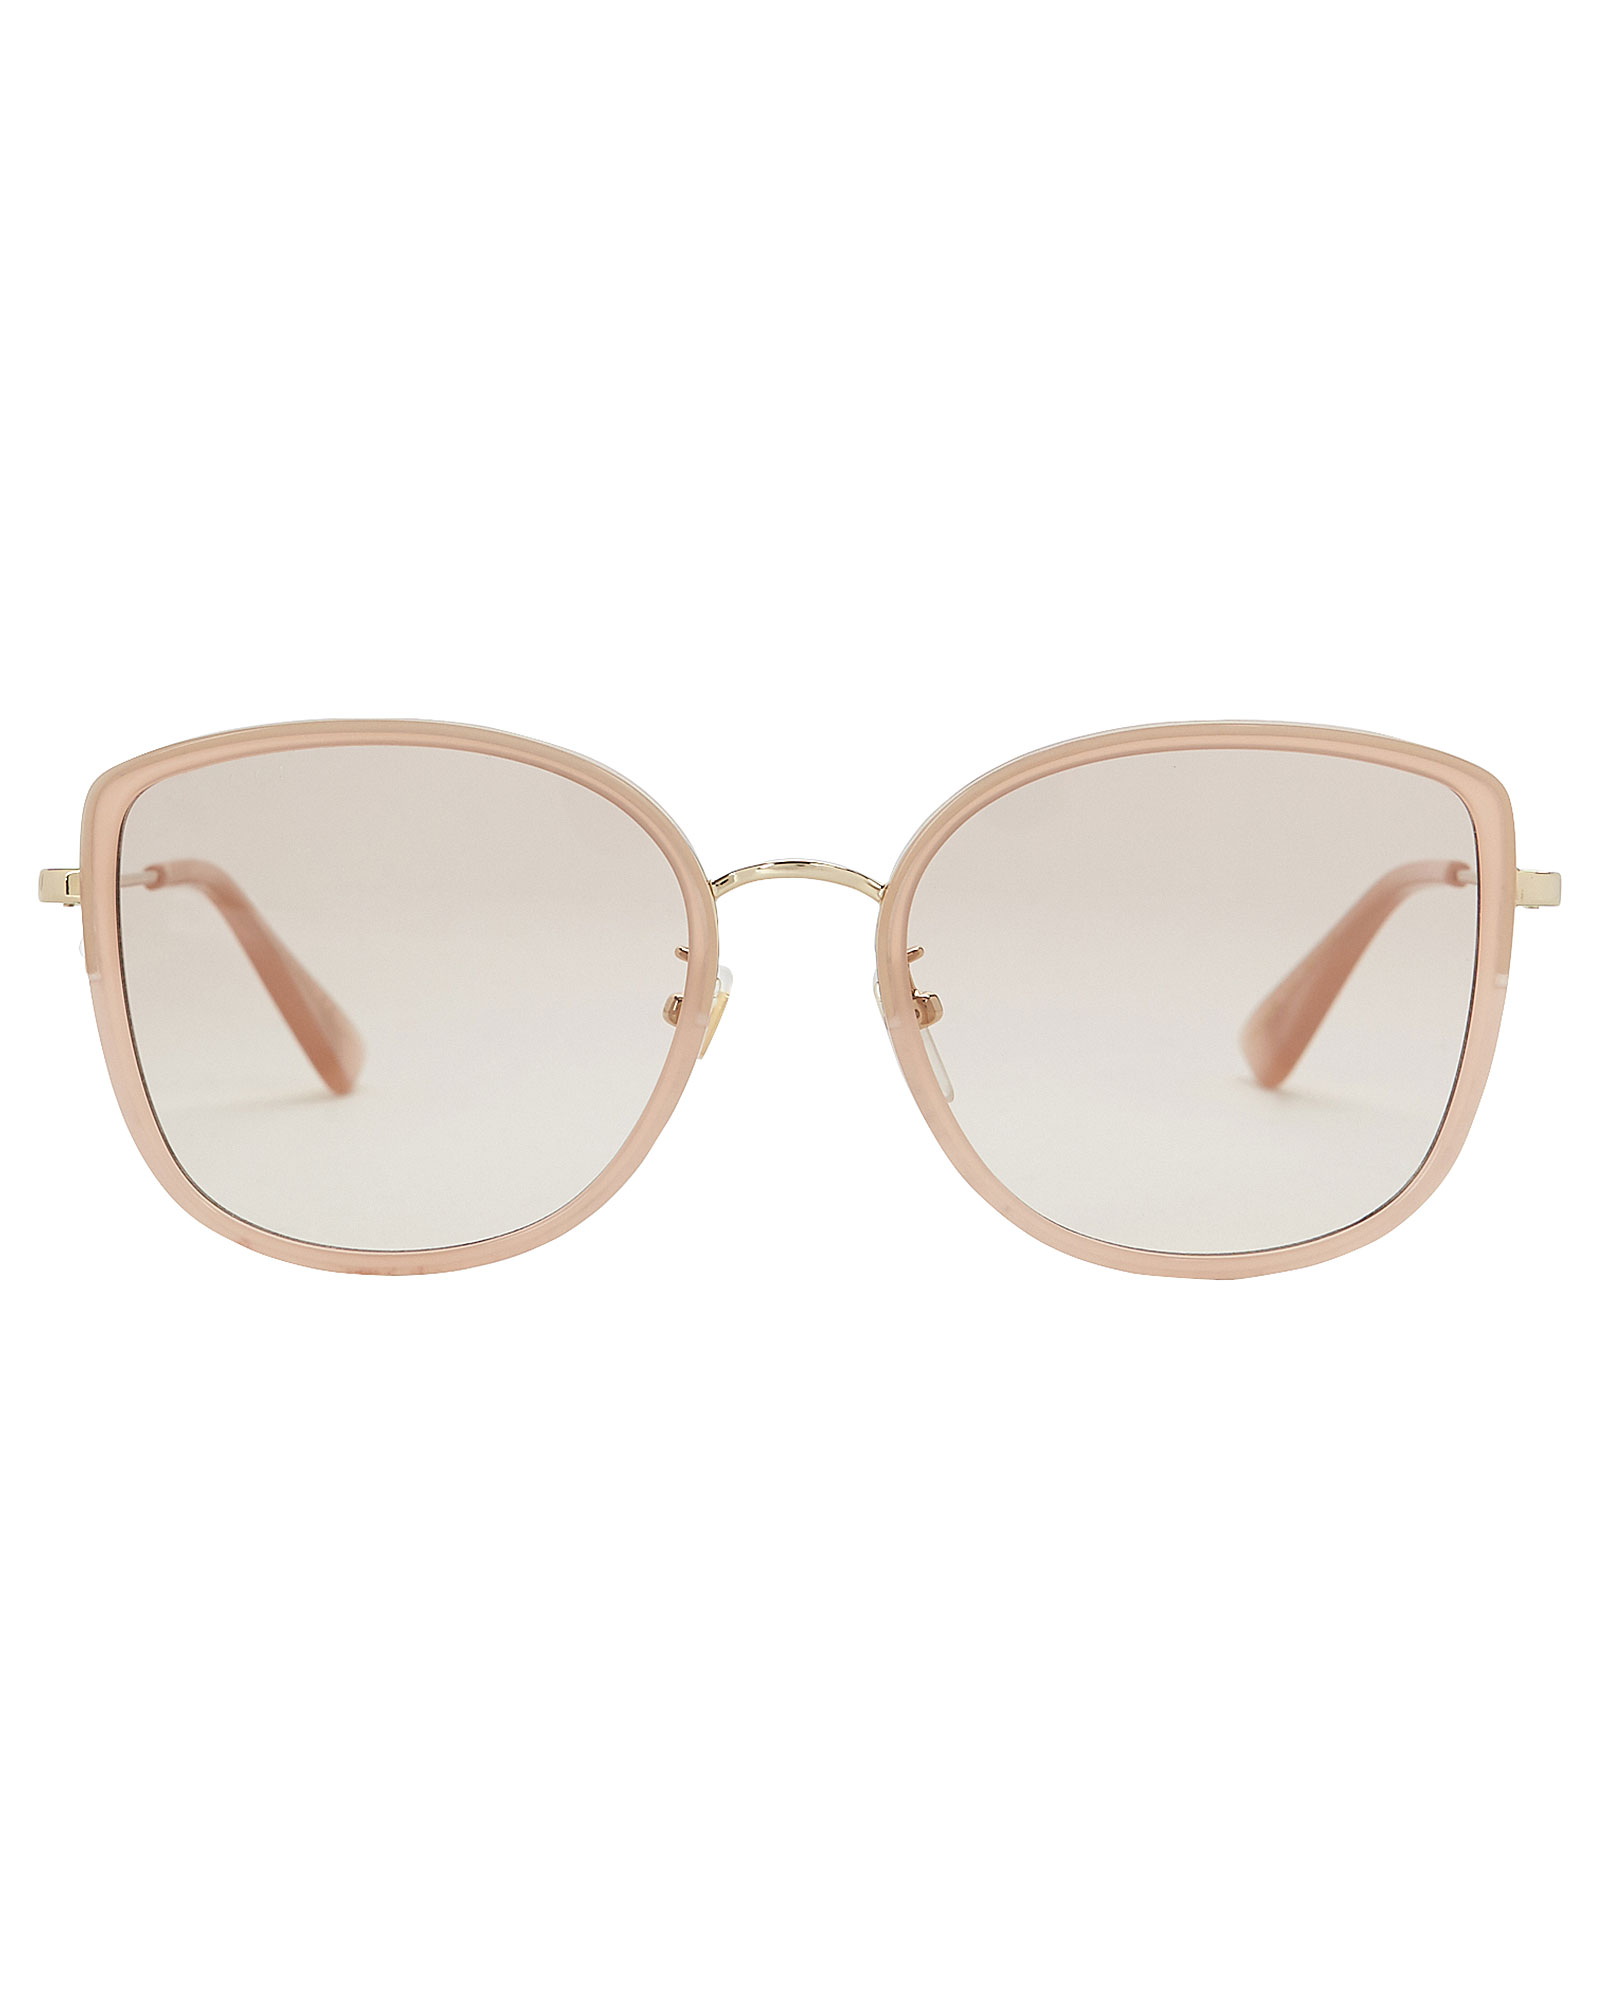 Gucci Havana Rounded Cat Eye Sunglasses In Rose